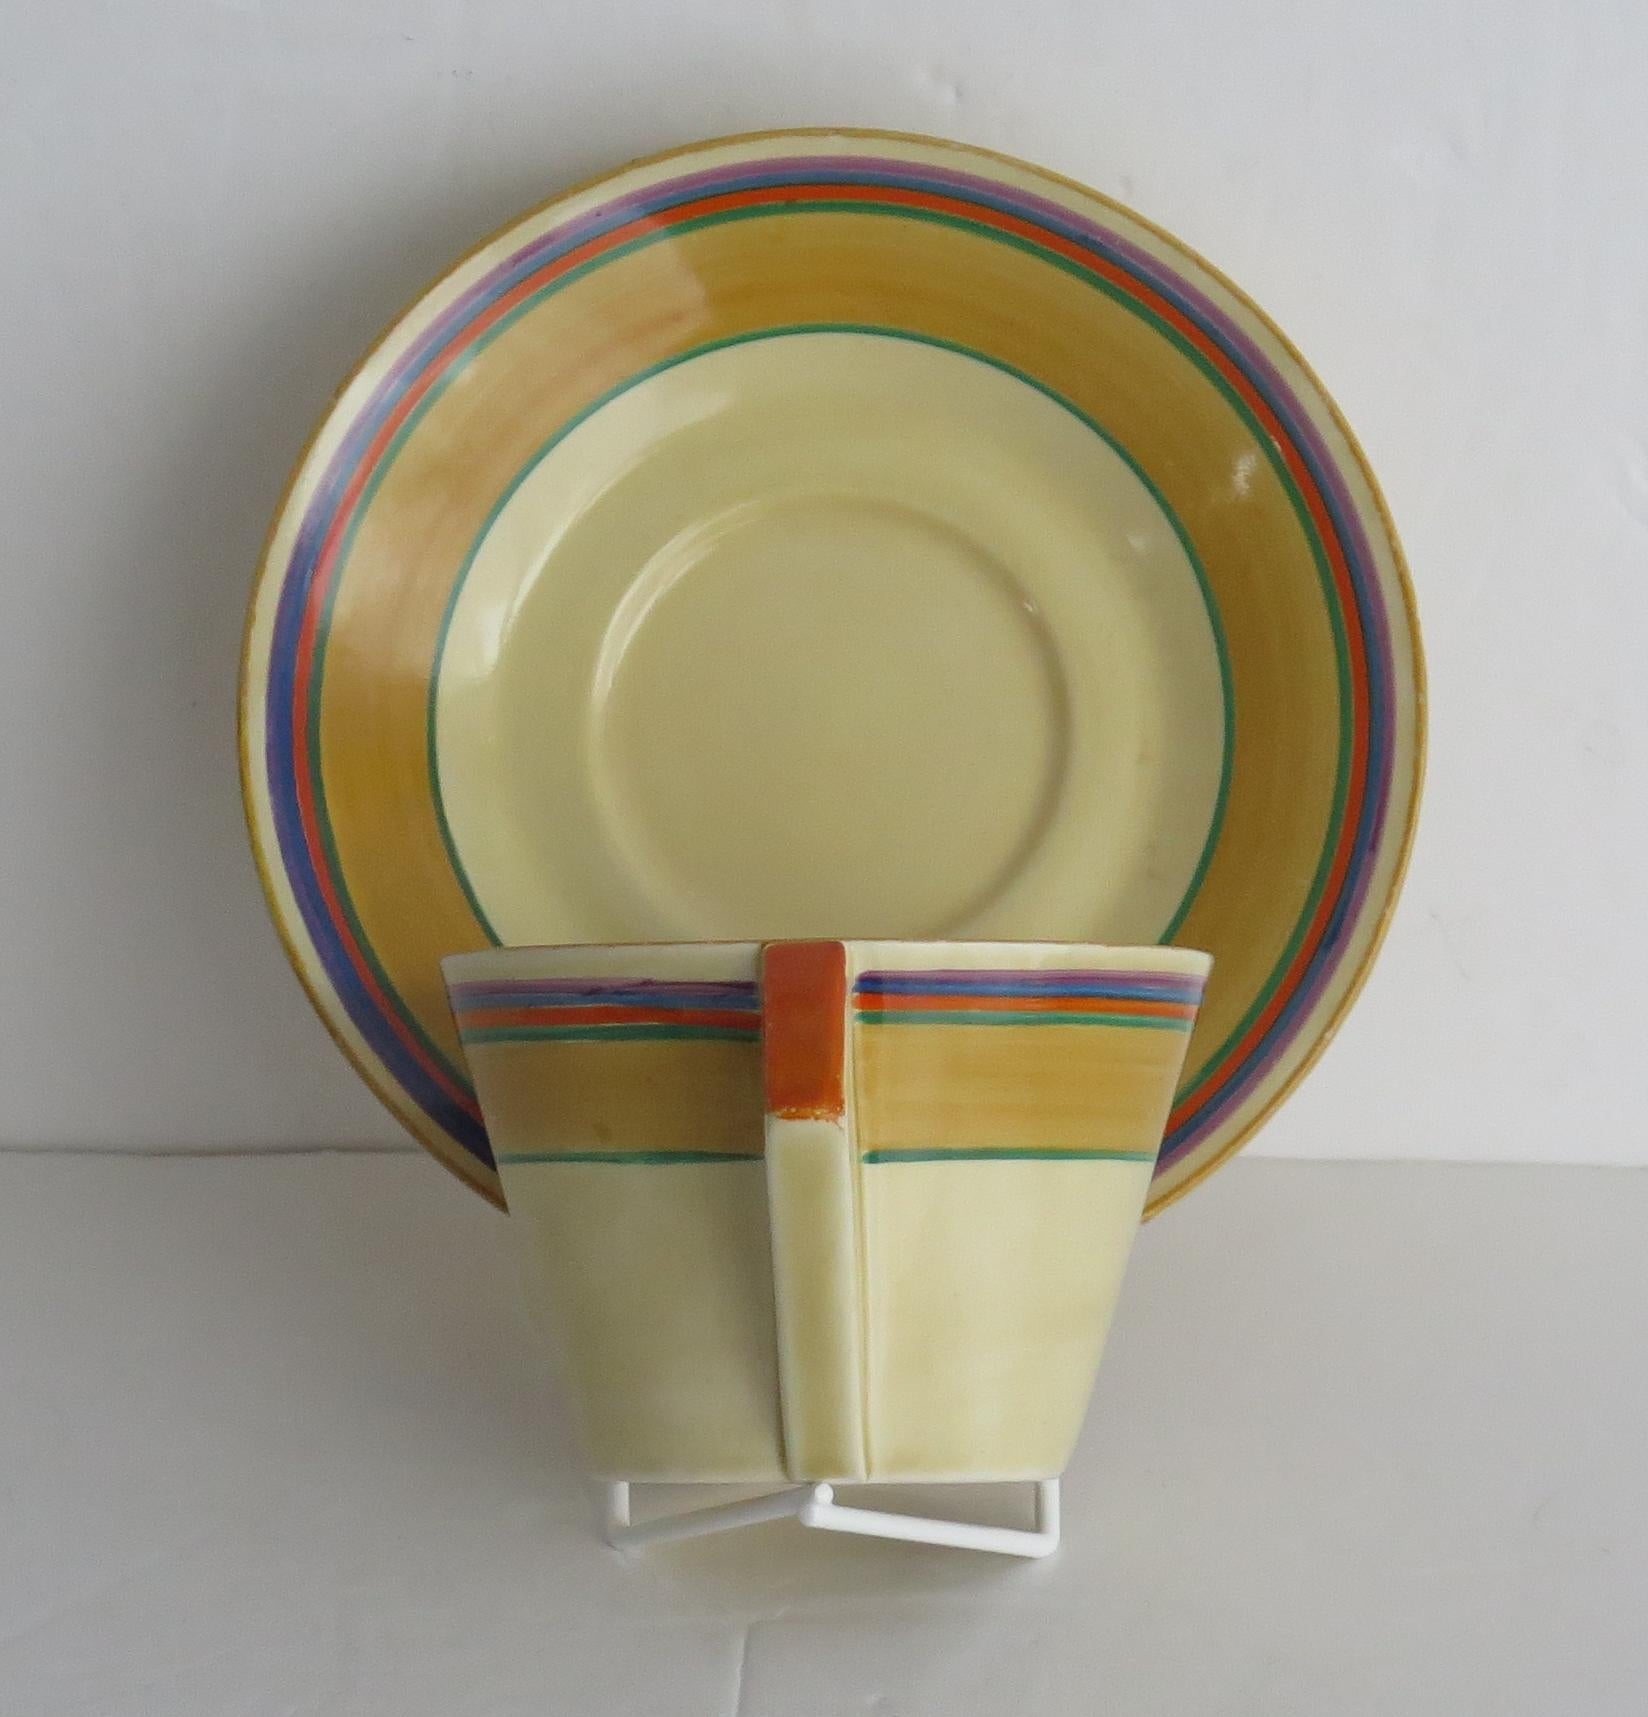 This is a cup & saucer duo in the conical shape with the Banded pattern all hand painted by the renowned Art Deco designer Clarice Cliff. This piece dates to the late Bizarre period, Circa 1930. 

This pattern has the distinctive 